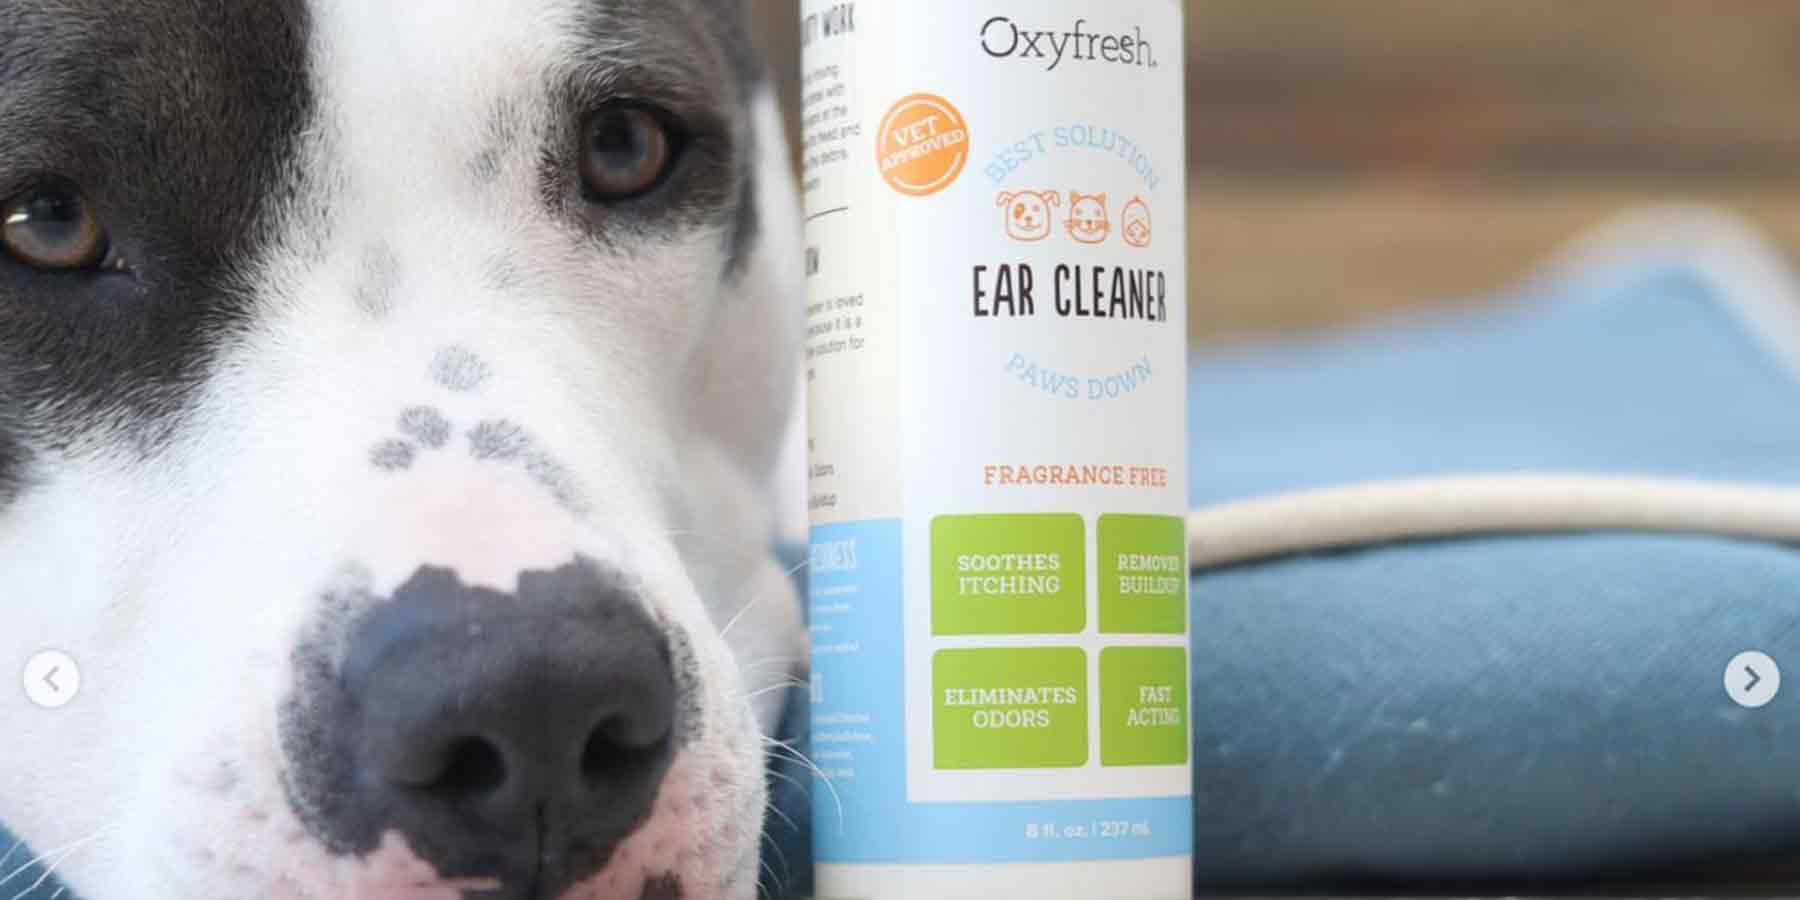 Social-Media-Post-From-Instagram-User-_growingup_garcia-pitbull-resting-head-on-the-floor-next-to-a-bottle-of-oxyfresh-dog-ear-cleaner-for-stinky-ear-and-wax-dirt-removal